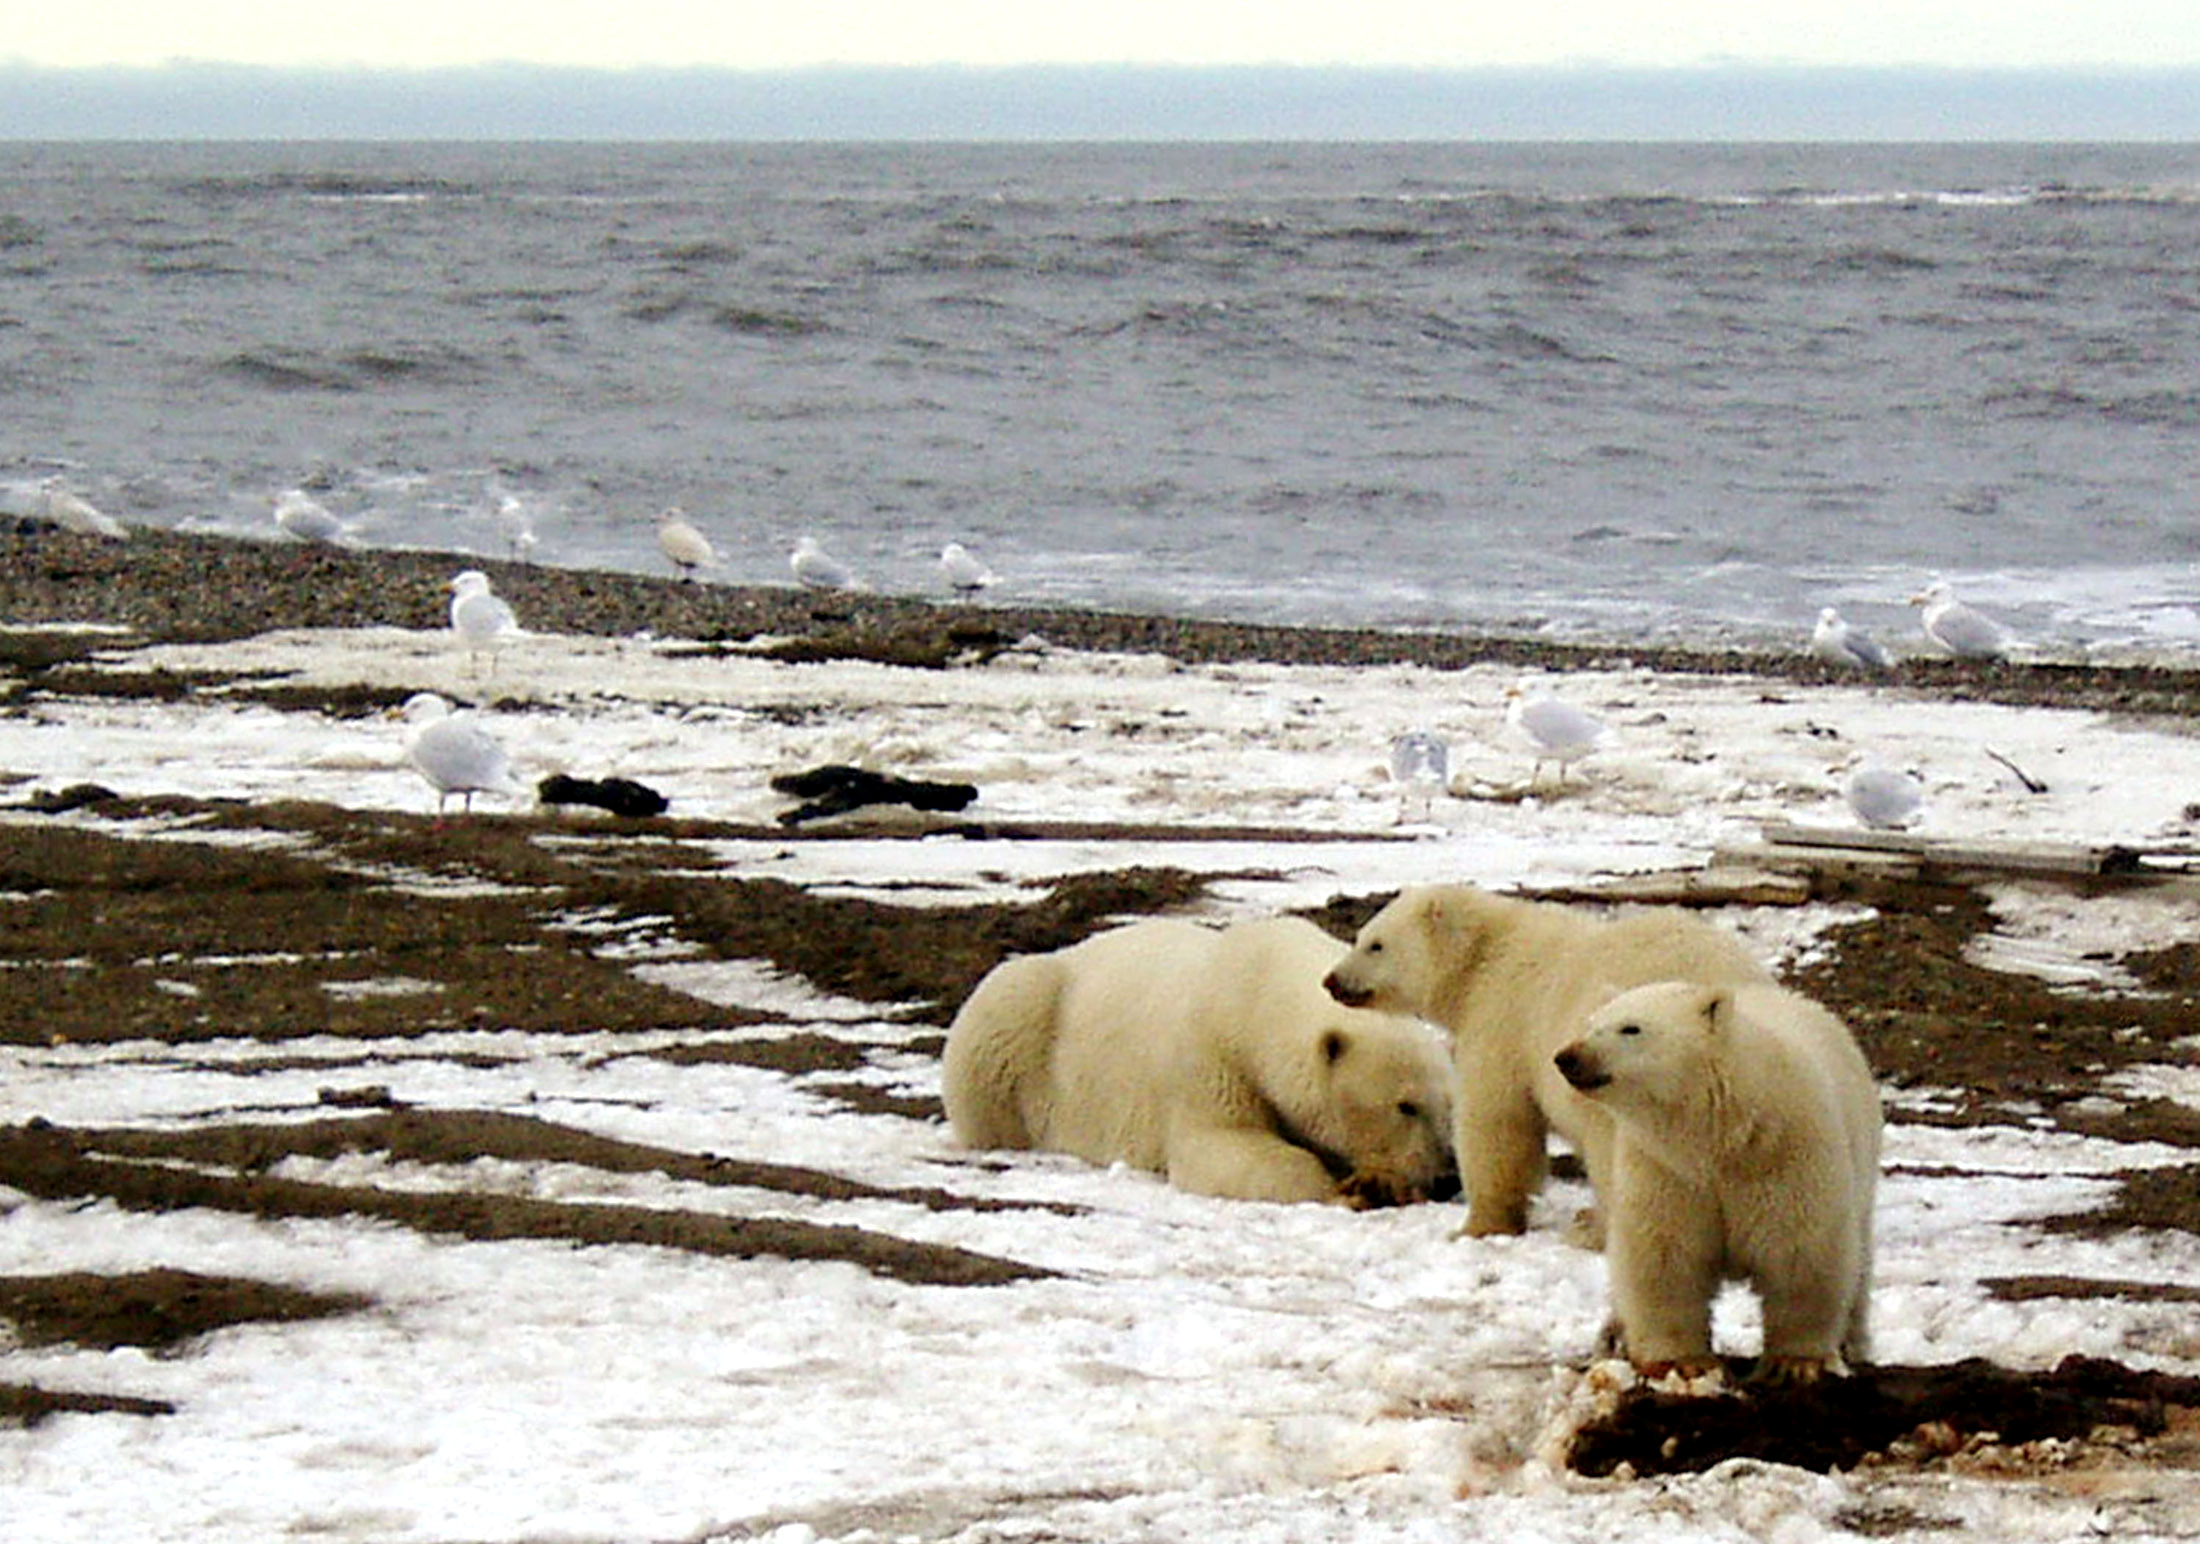 A polar bear sow and two cubs are seen on the Beaufort Sea coast within the 1002 Area of the Arctic National Wildlife Refuge in this undated handout photo provided by the U.S. Fish and Wildlife Service Alaska Image Library on December 21, 2005.  U.S. Fish and Wildlife Service/Handout via REUTERS